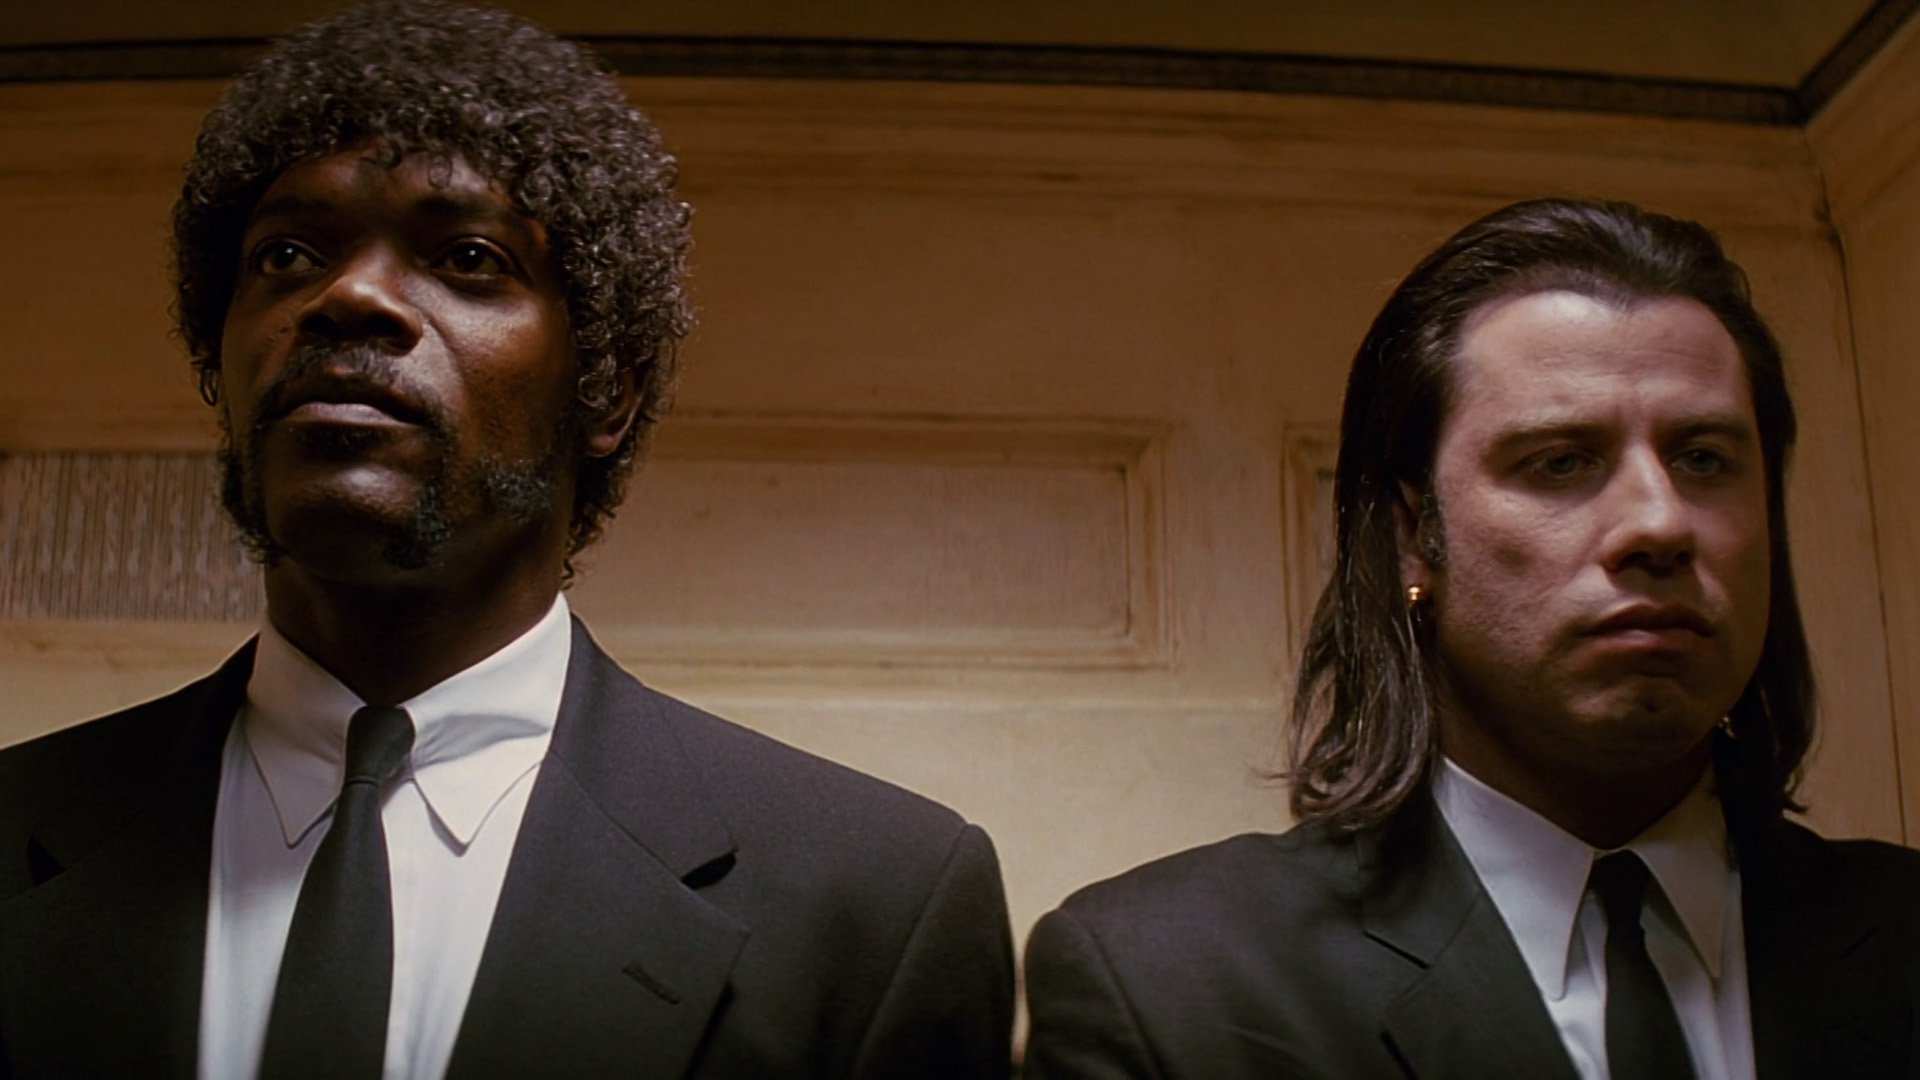 Nice wallpapers Pulp Fiction 1920x1080px